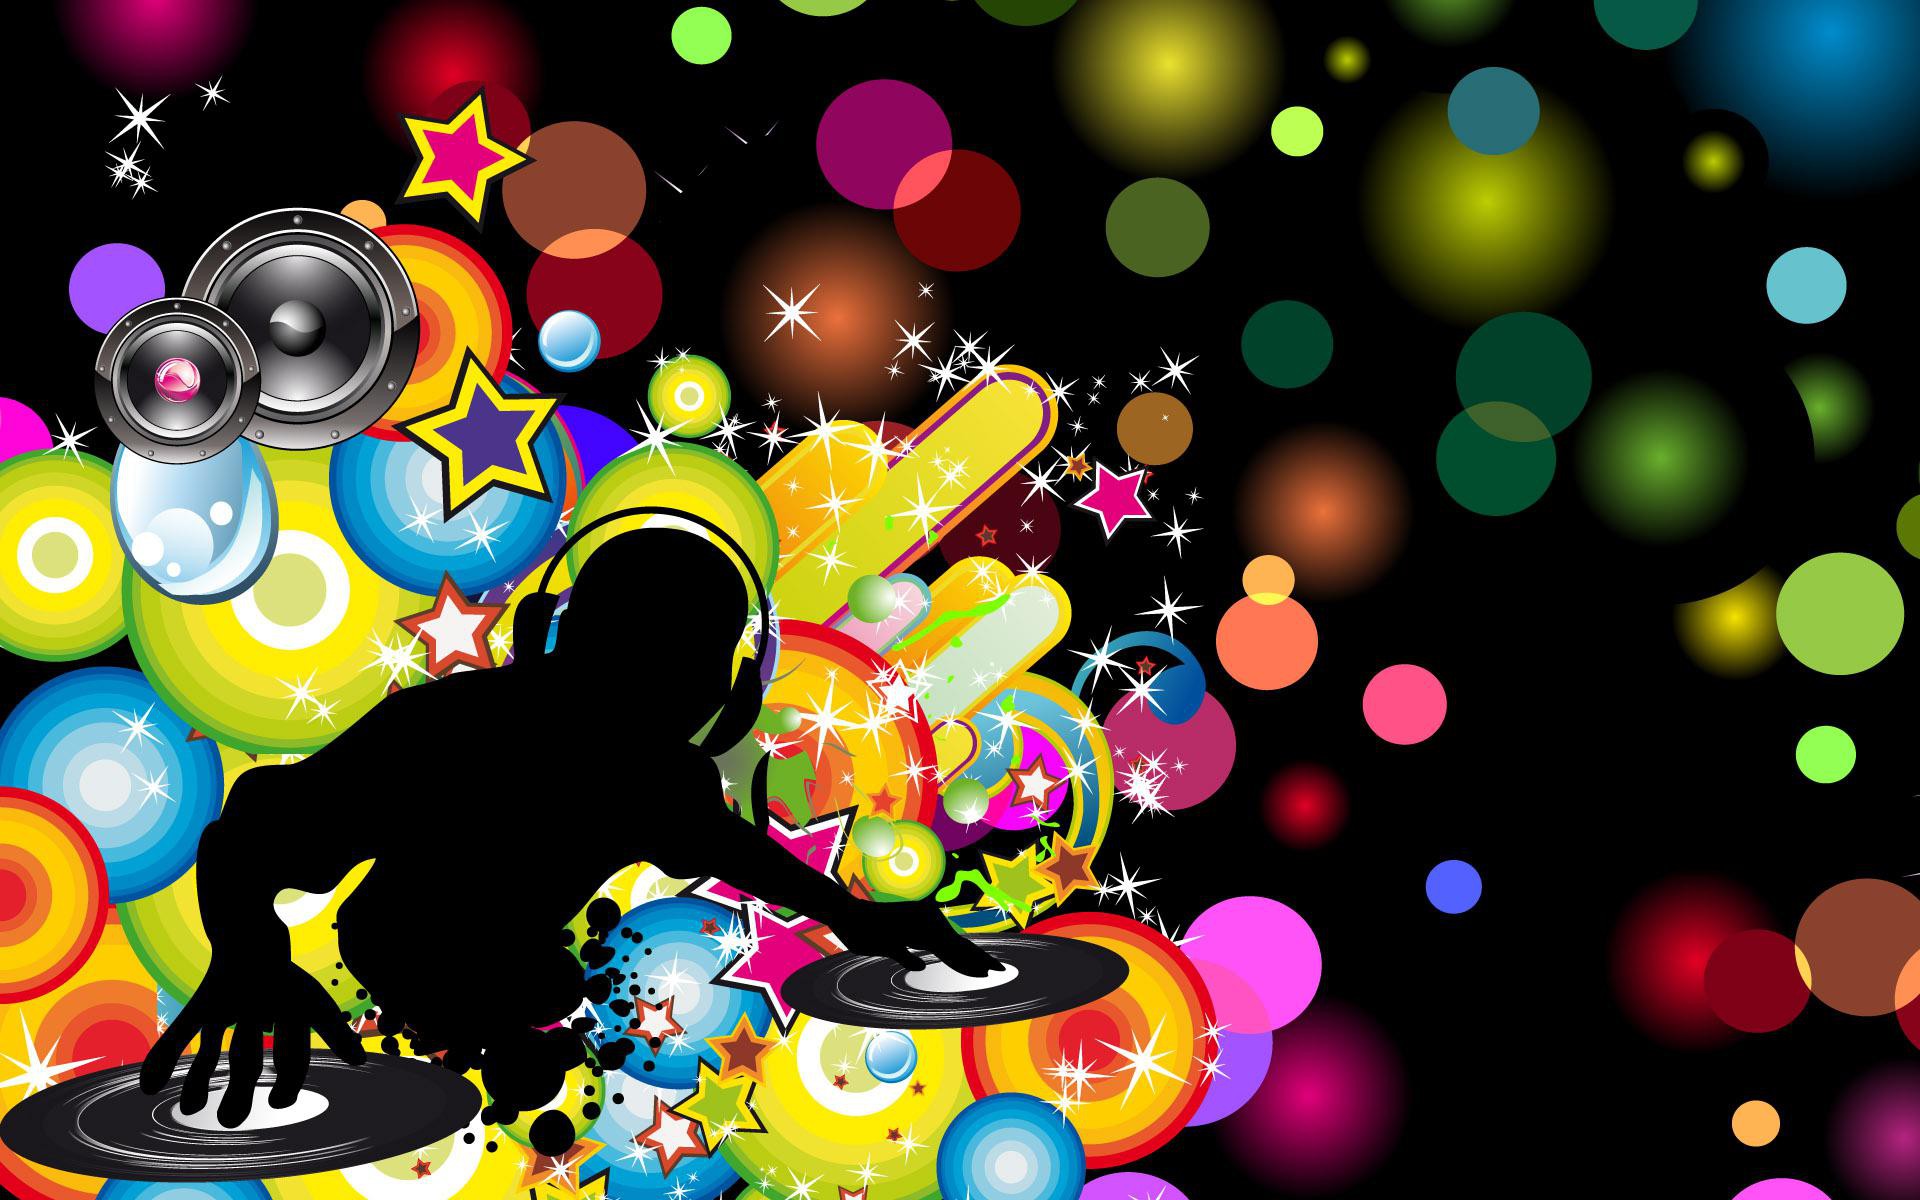 Wallpapers Music Other Colorful Dubstep 1920x1200 | #372156 #music